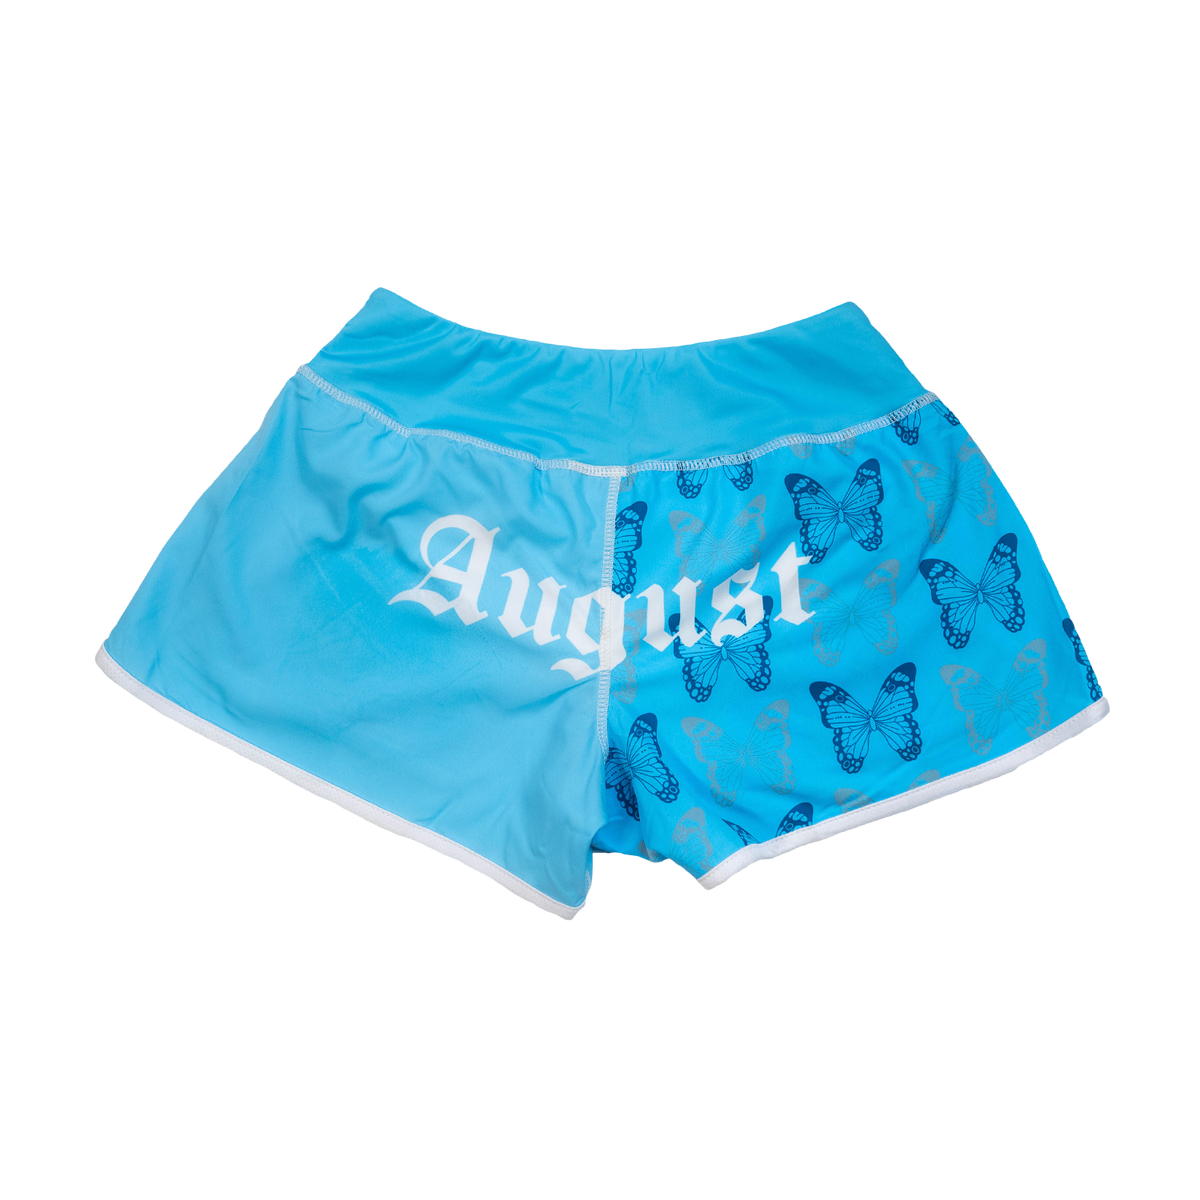 Butterfly Training Shorts